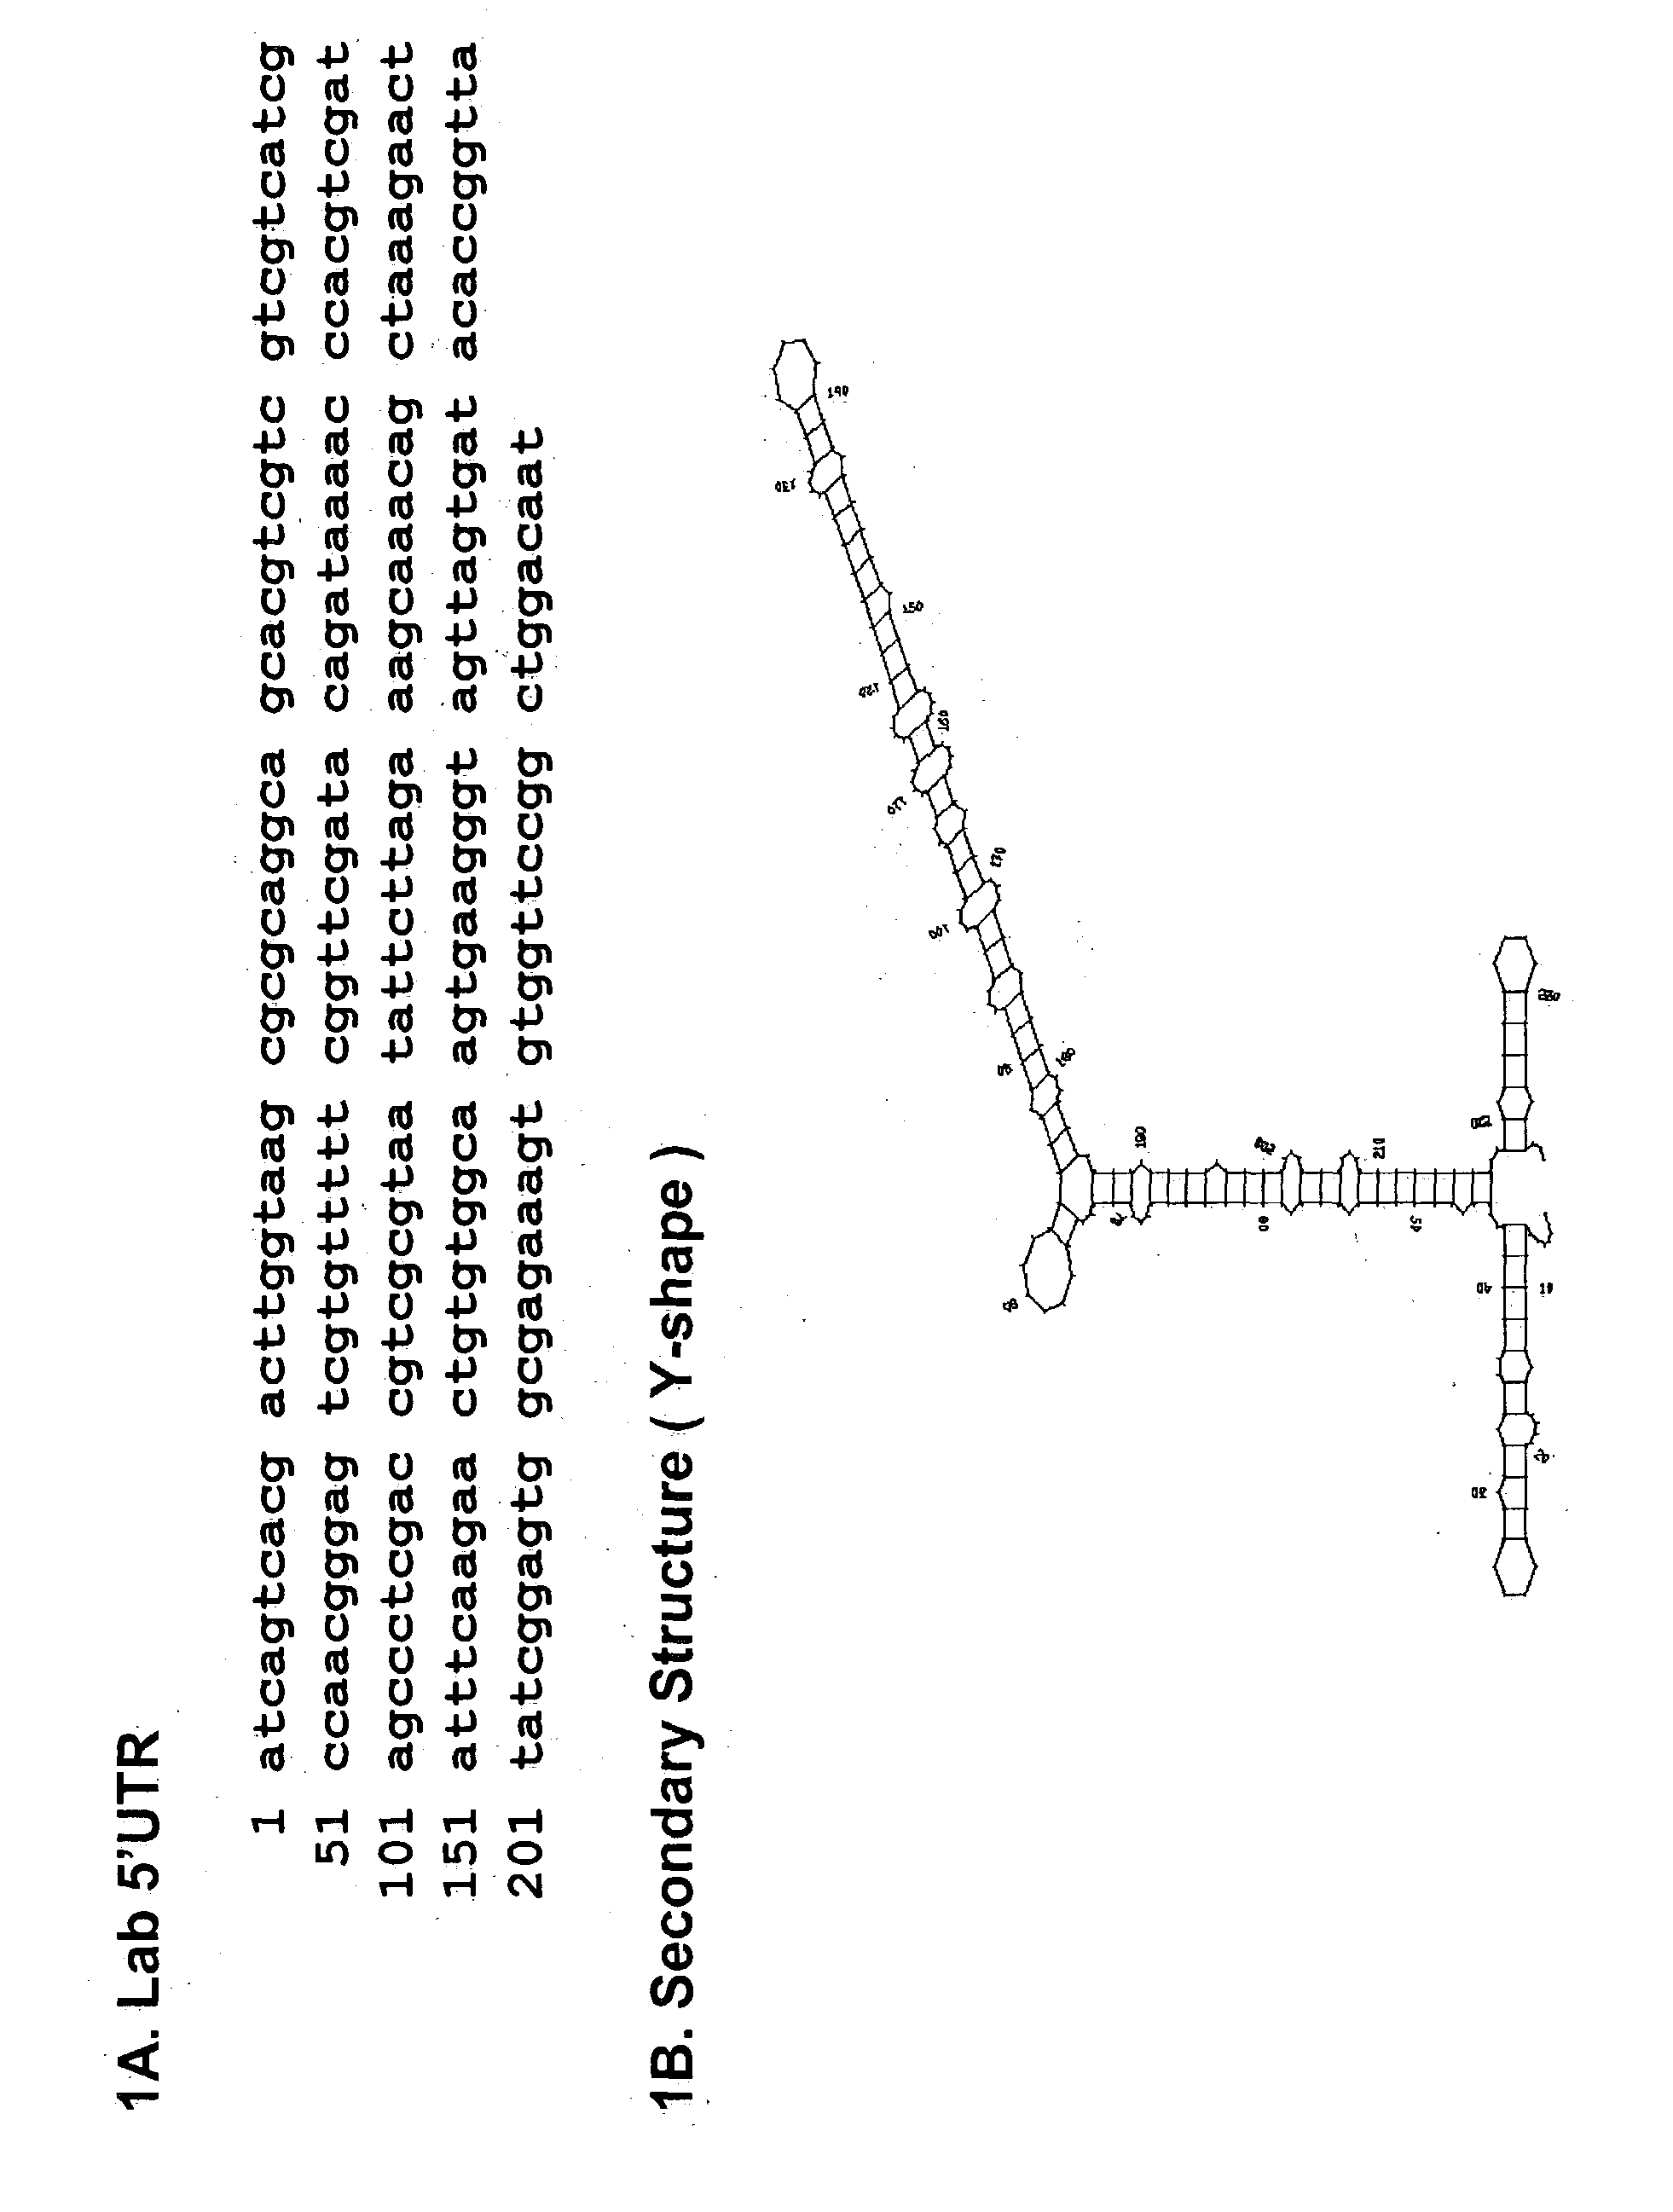 Internal ribosome entry site of the labial gene for protein expression